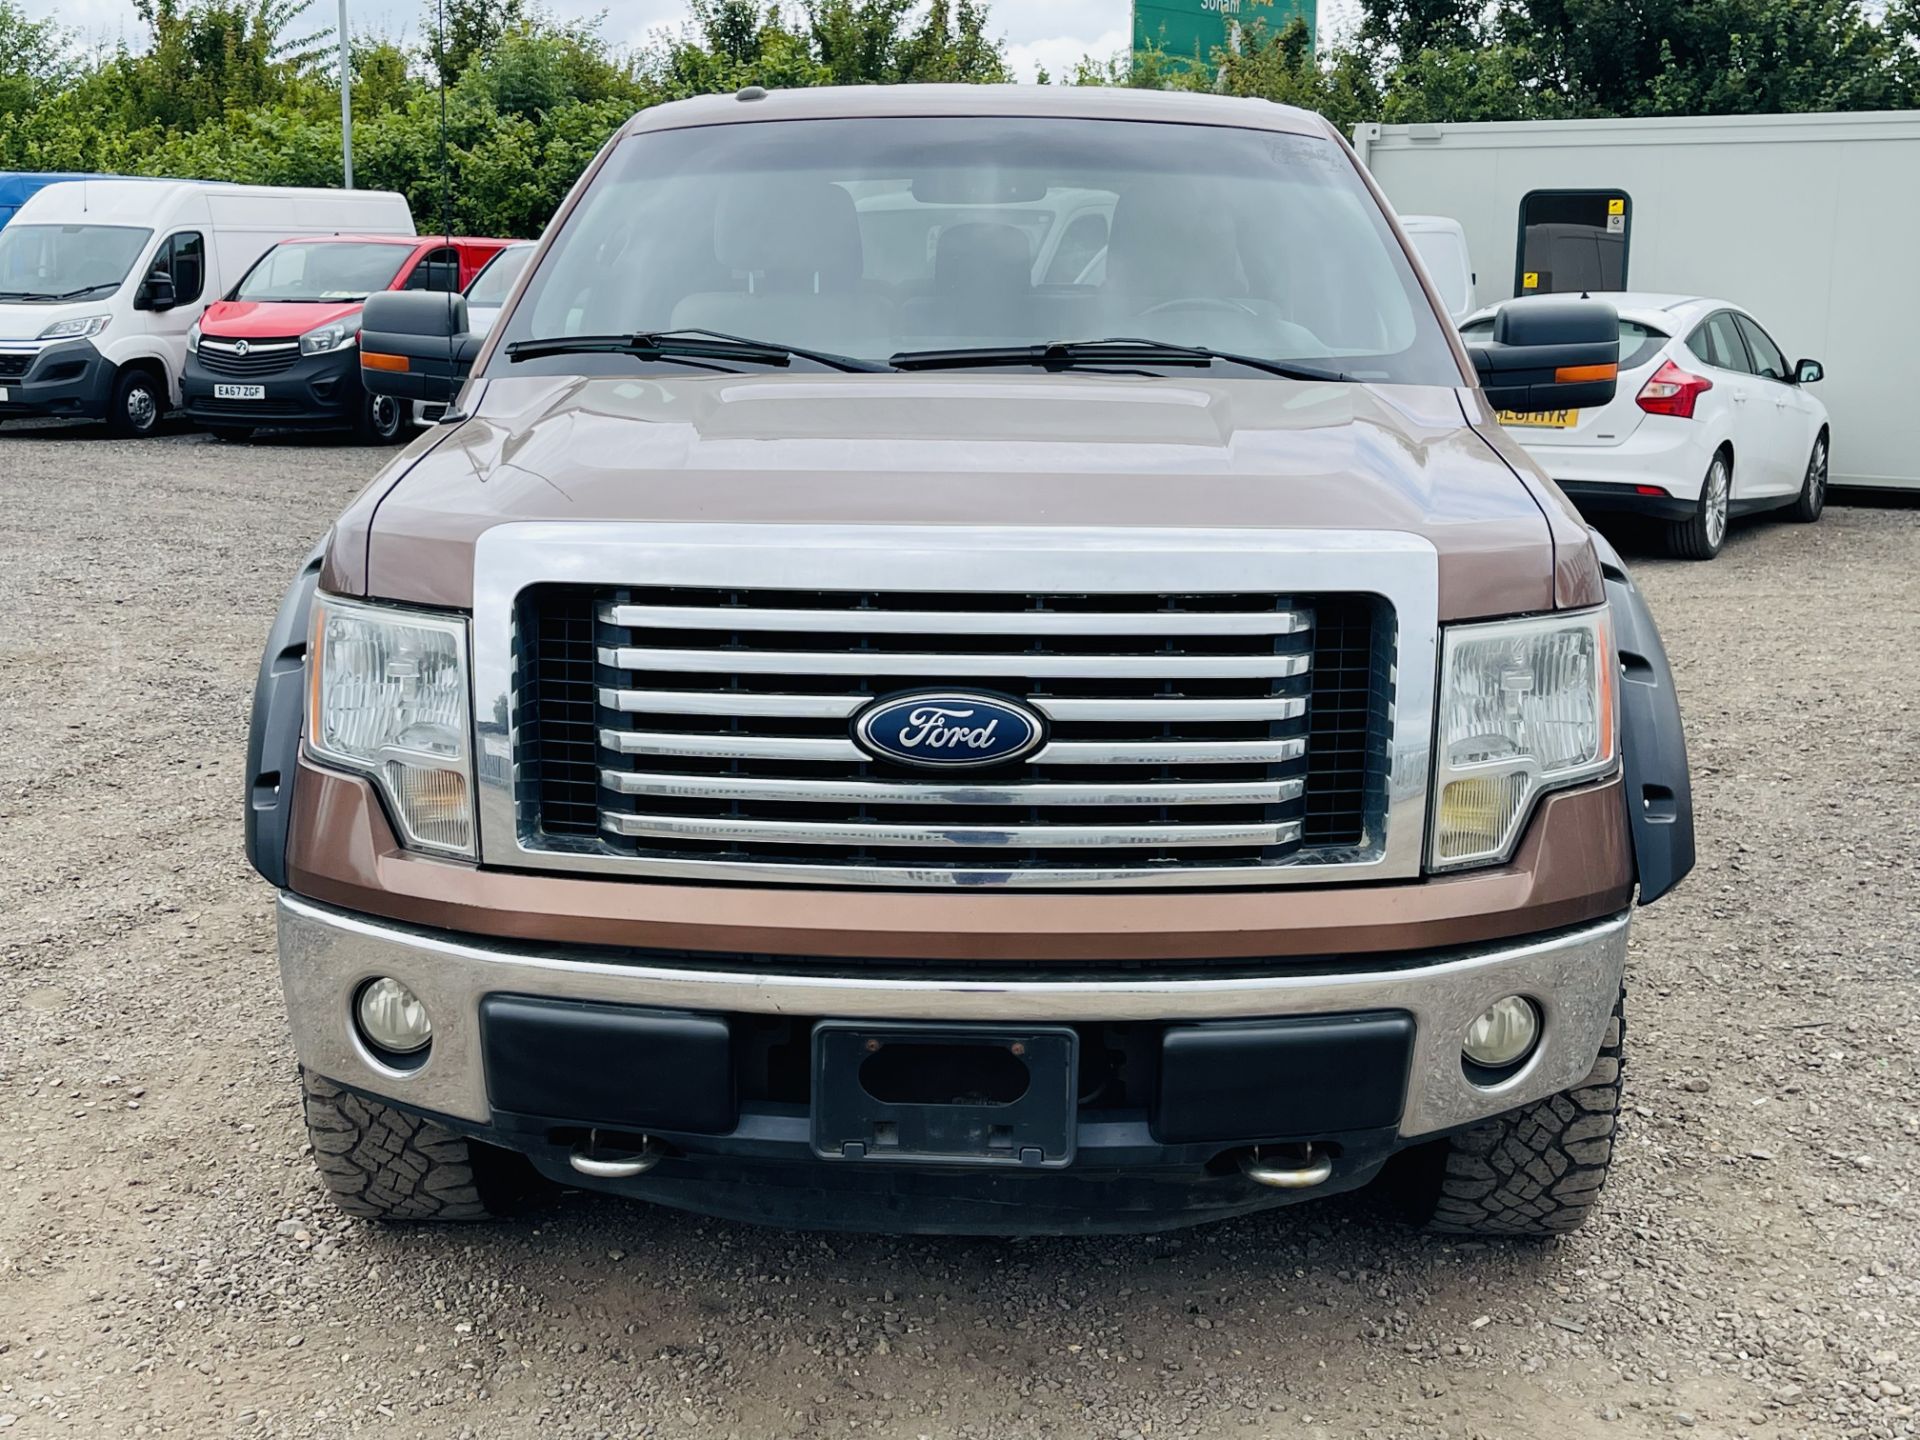 ** ON SALE ** Ford F-150 5.0L V8 XLT XTR Edition Super-Crew 4X4 '2011 Year' - 6 Seats - Air Con - - Image 3 of 27